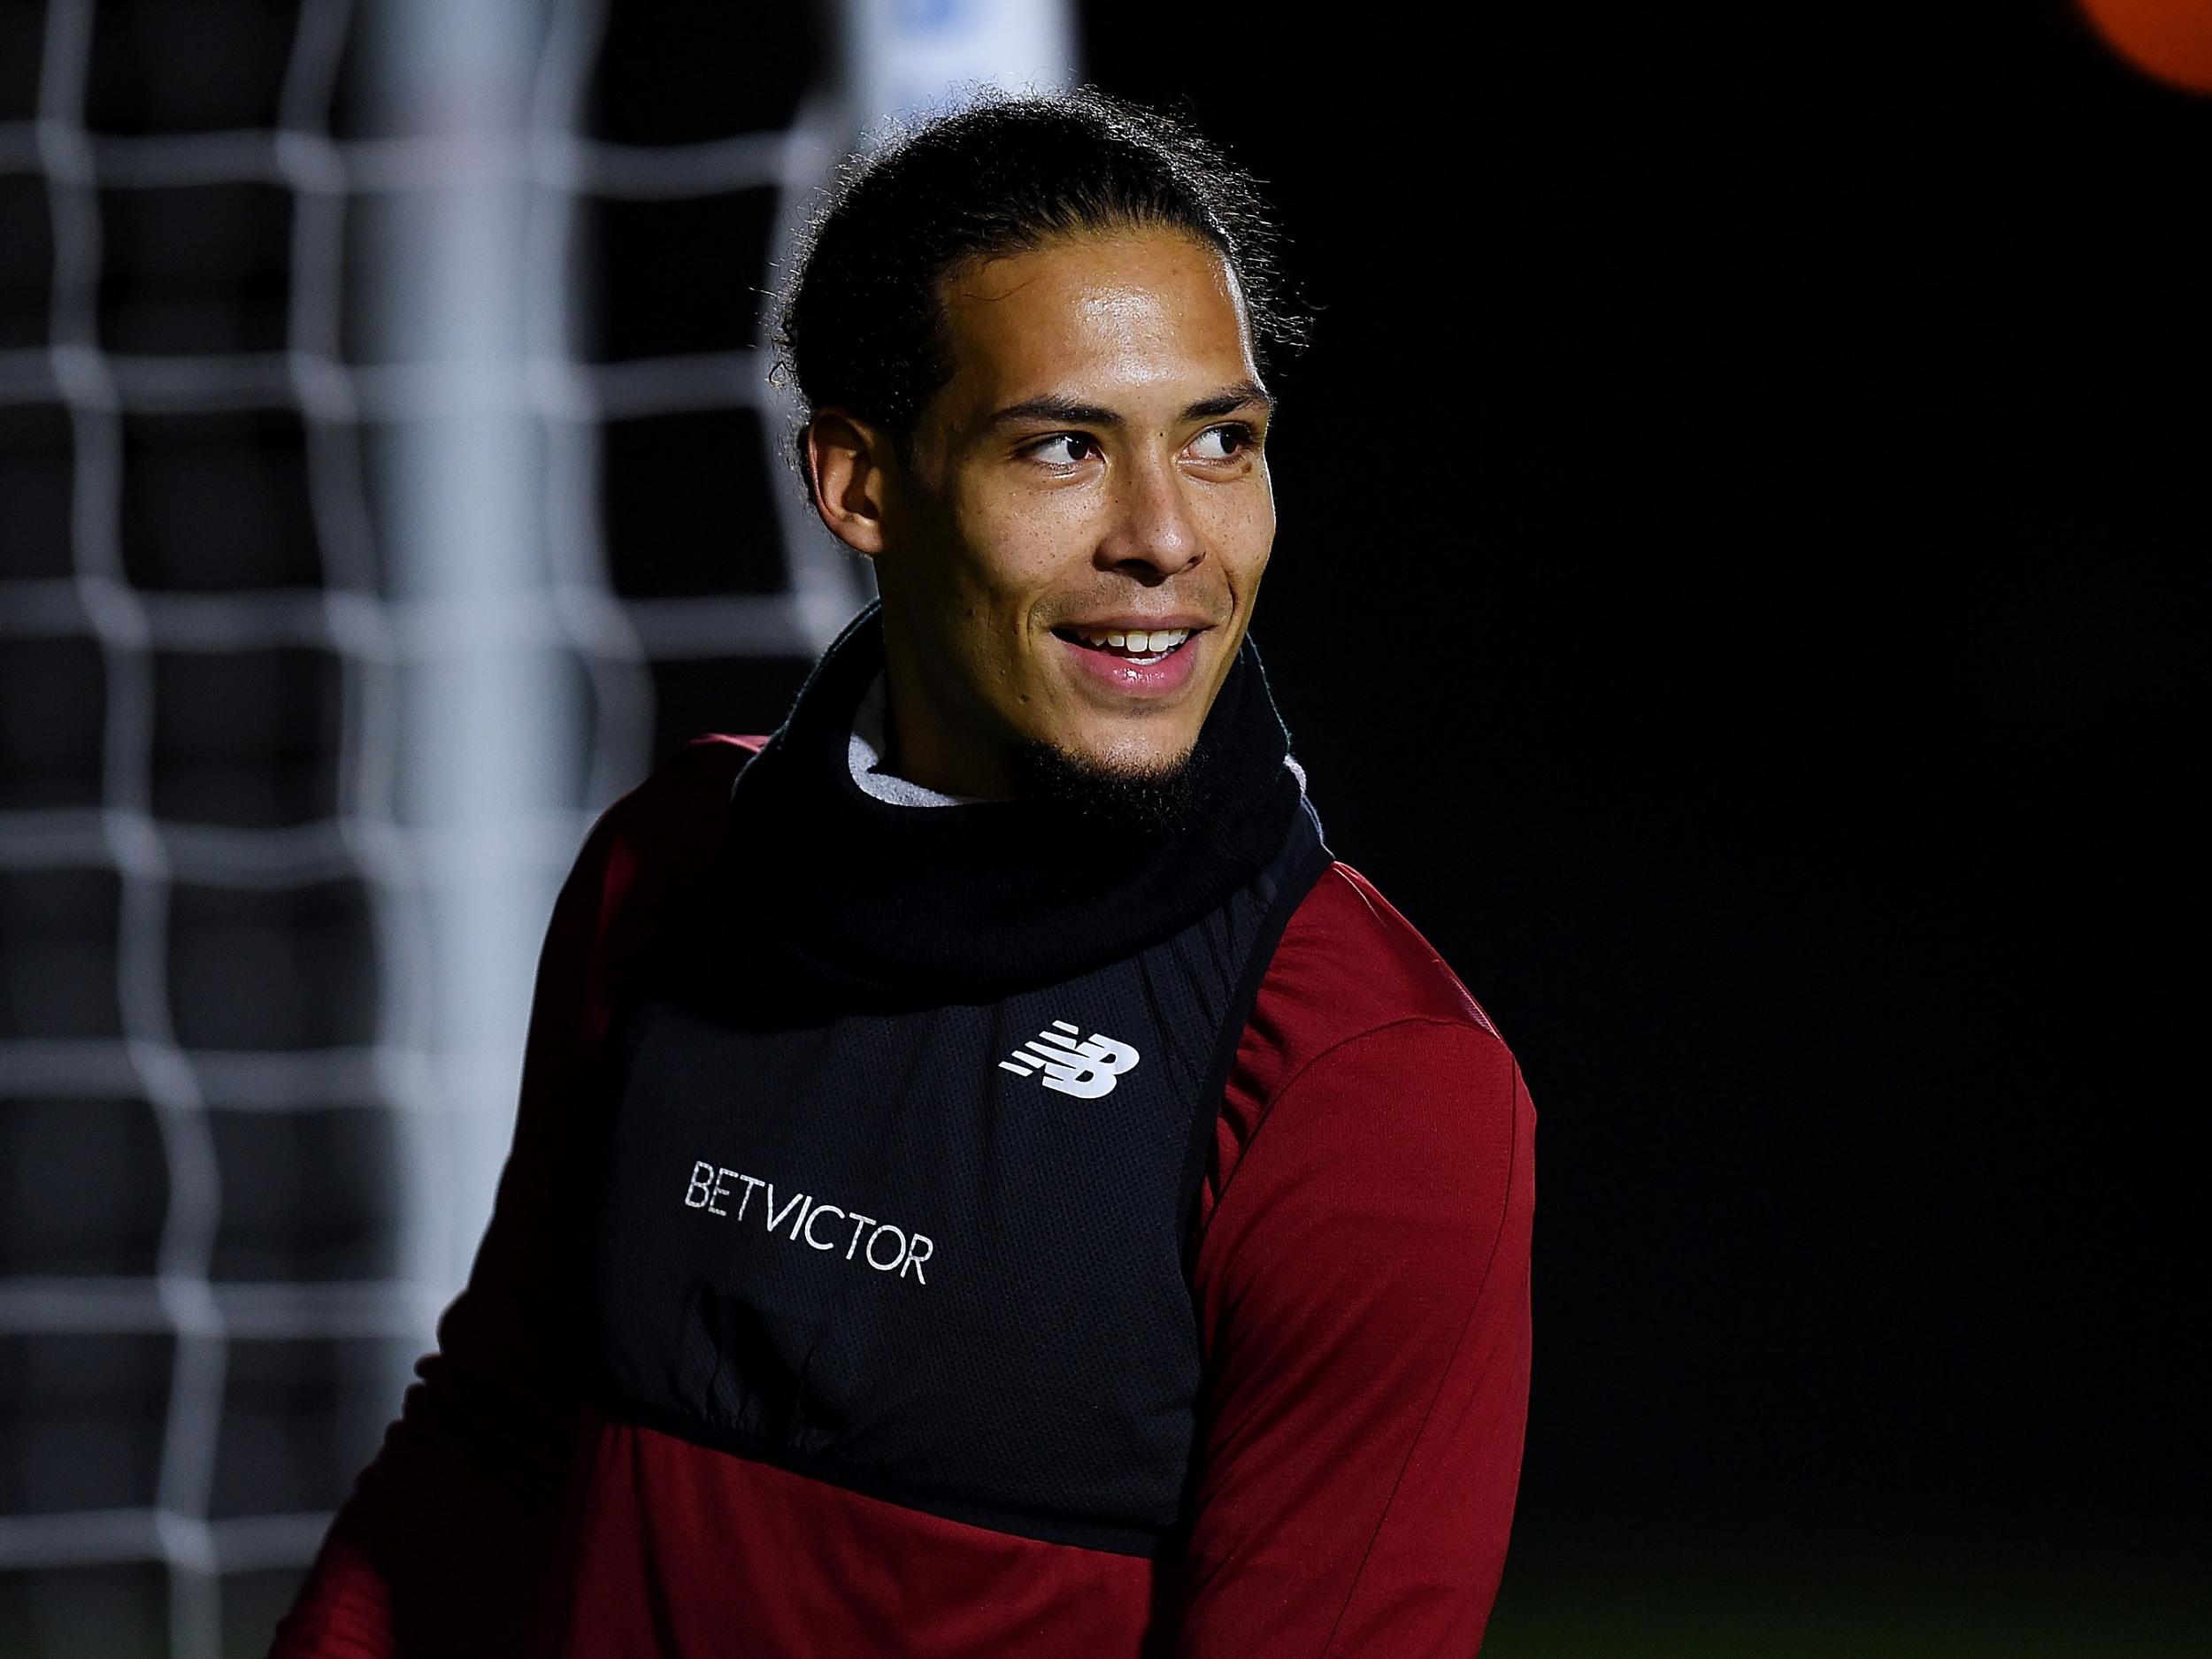 Virgil van Dijk completed his long-awaited move to Liverpool on New Year's Day